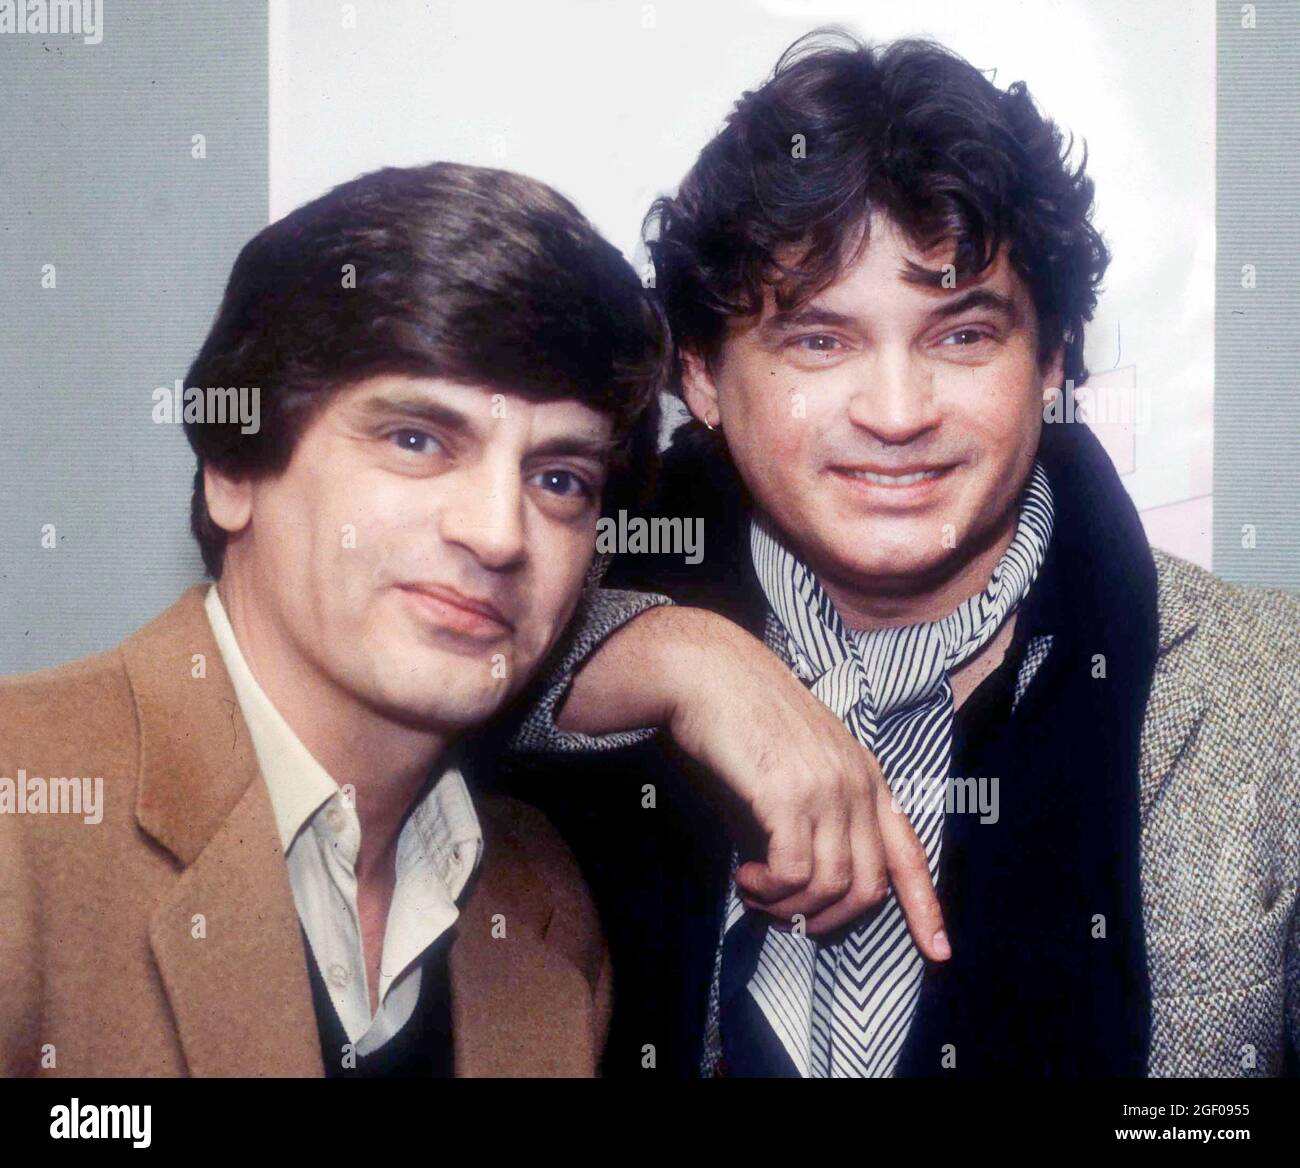 **FILE PHOTO** Don Everly Of The Everly Brothers Has Passed Away.  Phil Everly and Don Everly, The Everly Brothers, Circa 1980's Credit: Adam Scull/PHOTOlink/MediaPunch Stock Photo